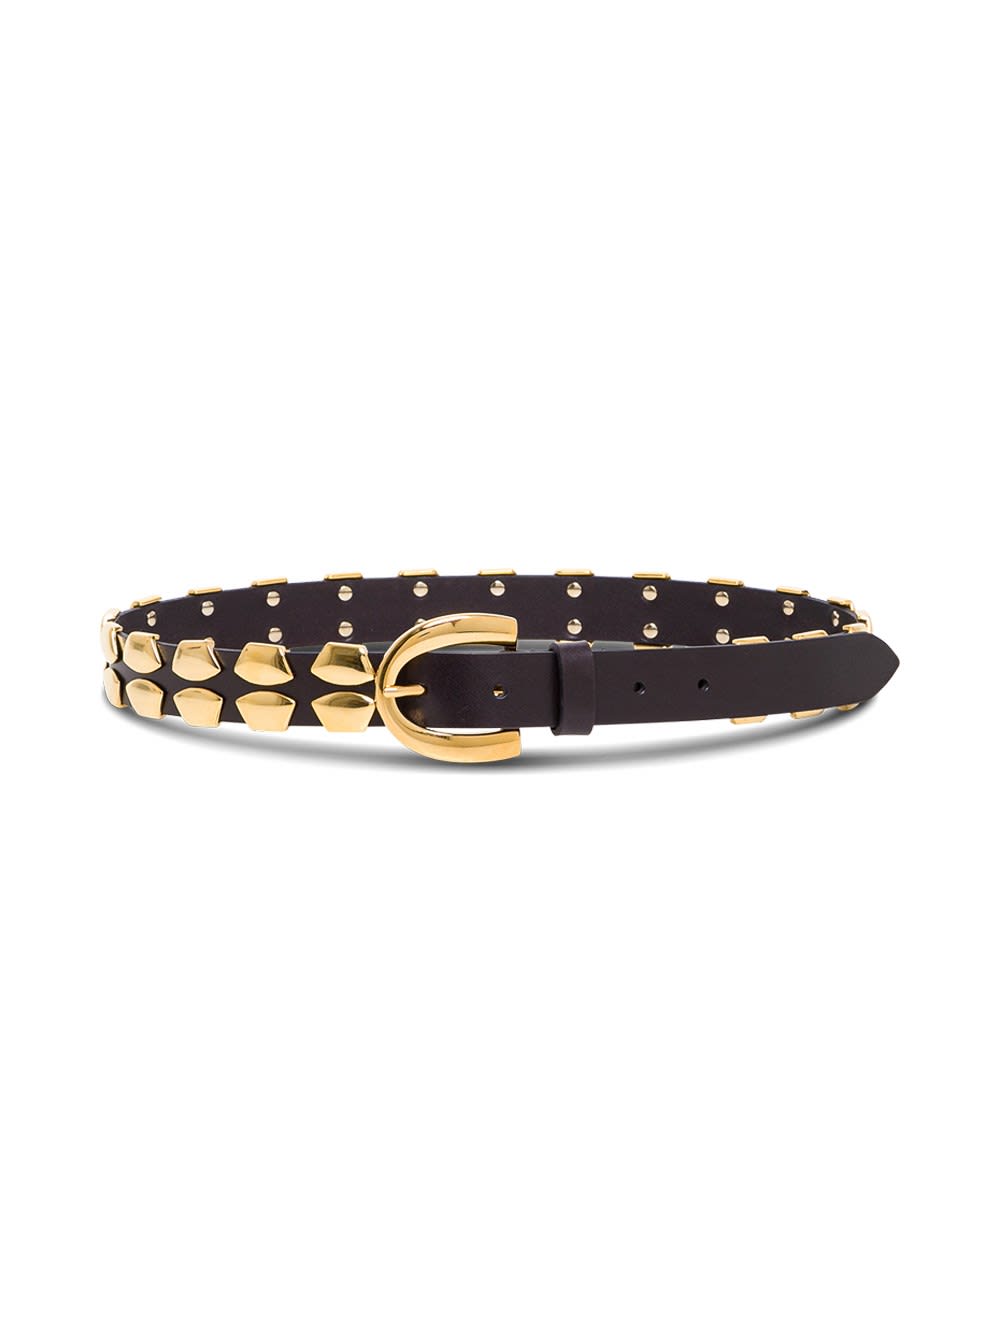 Alberta Ferretti Leather Belt With Gold-colored Studs Detail